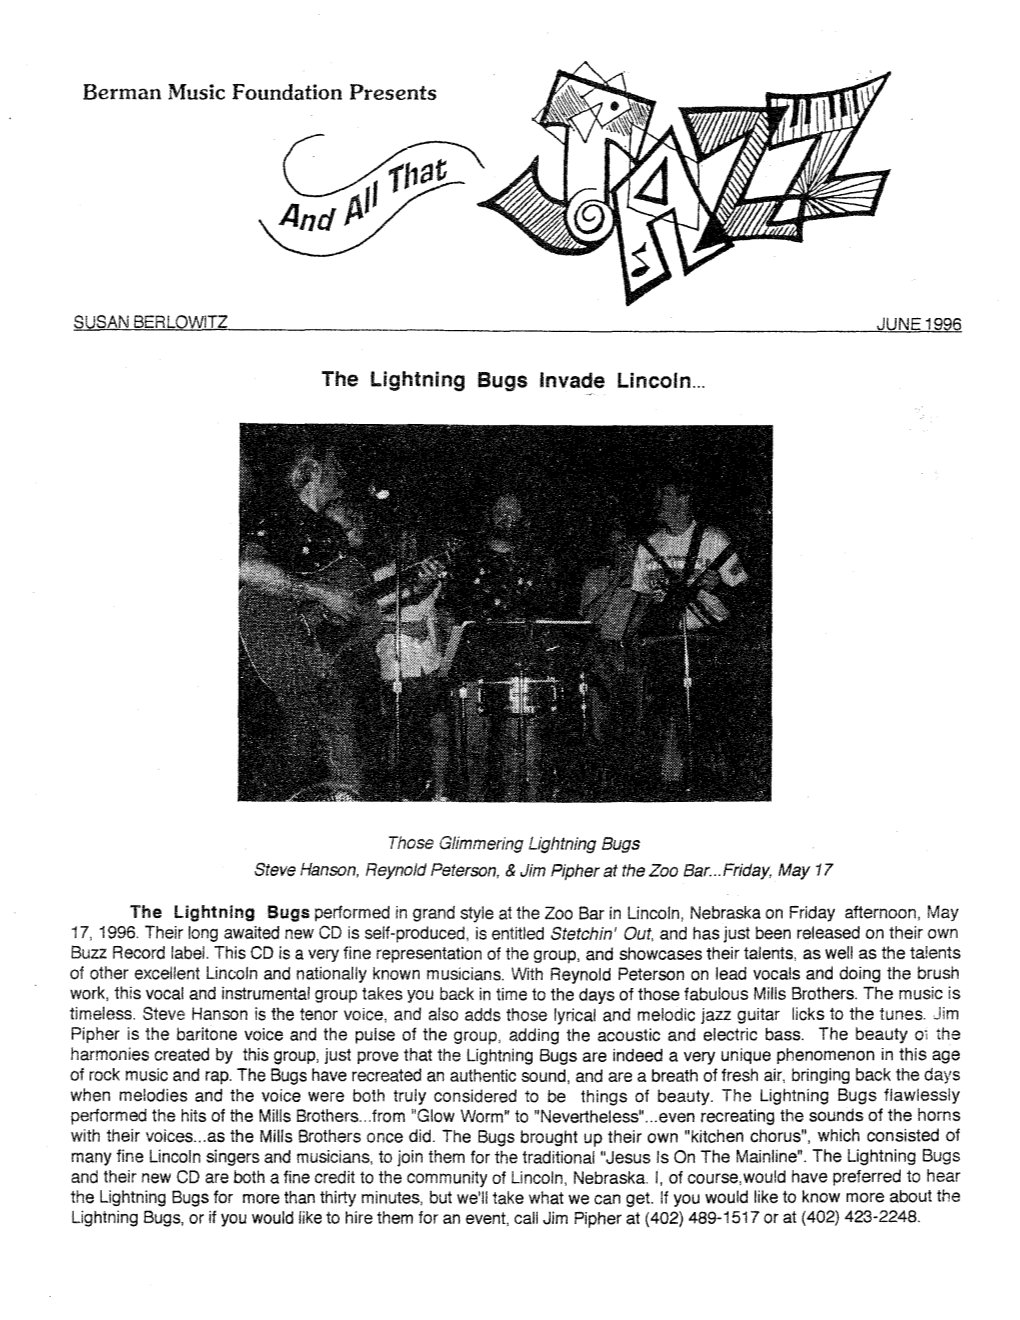 Berman Music Foundation Presents the Lightning Bugs Invade Lincoln